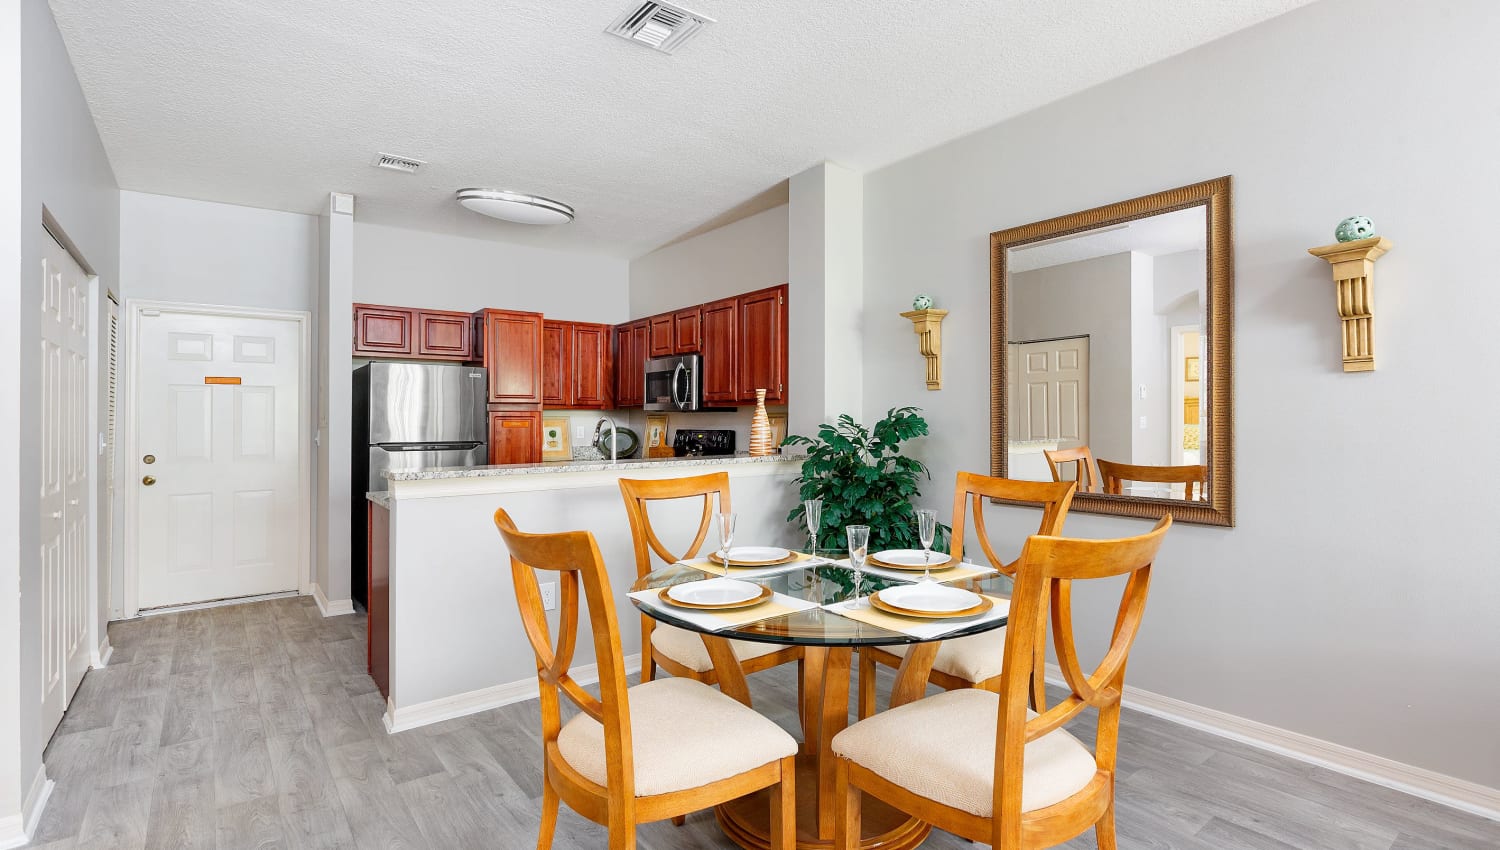 Model dining area and kitchen in apartment at Villas of Juno Apartments in Juno Beach, Florida